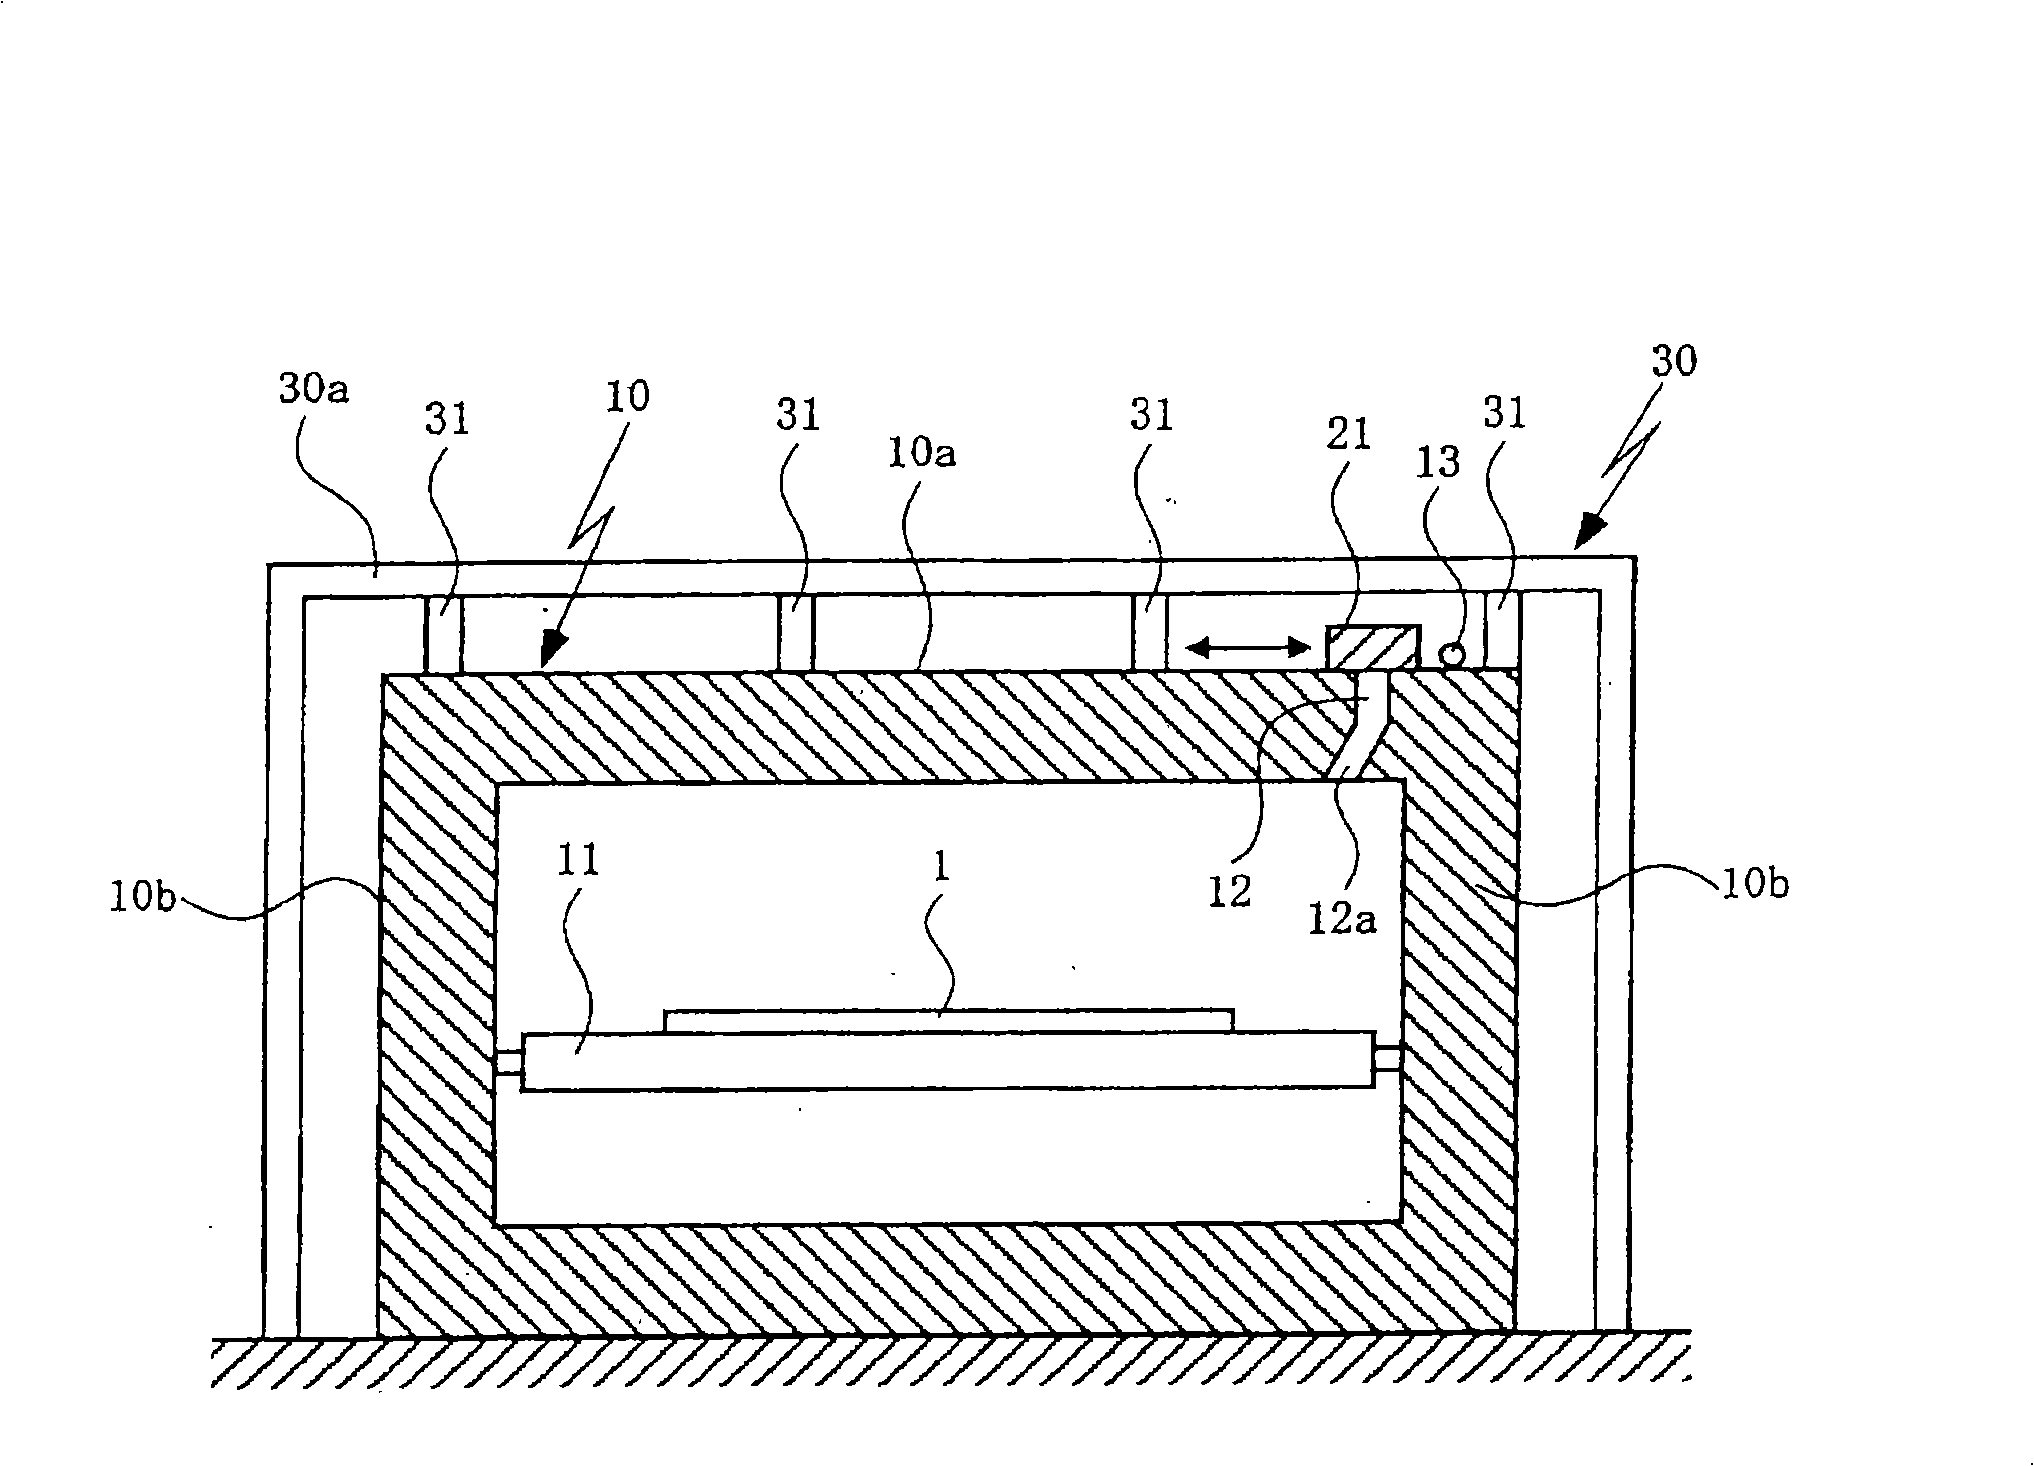 Continuous annealing device